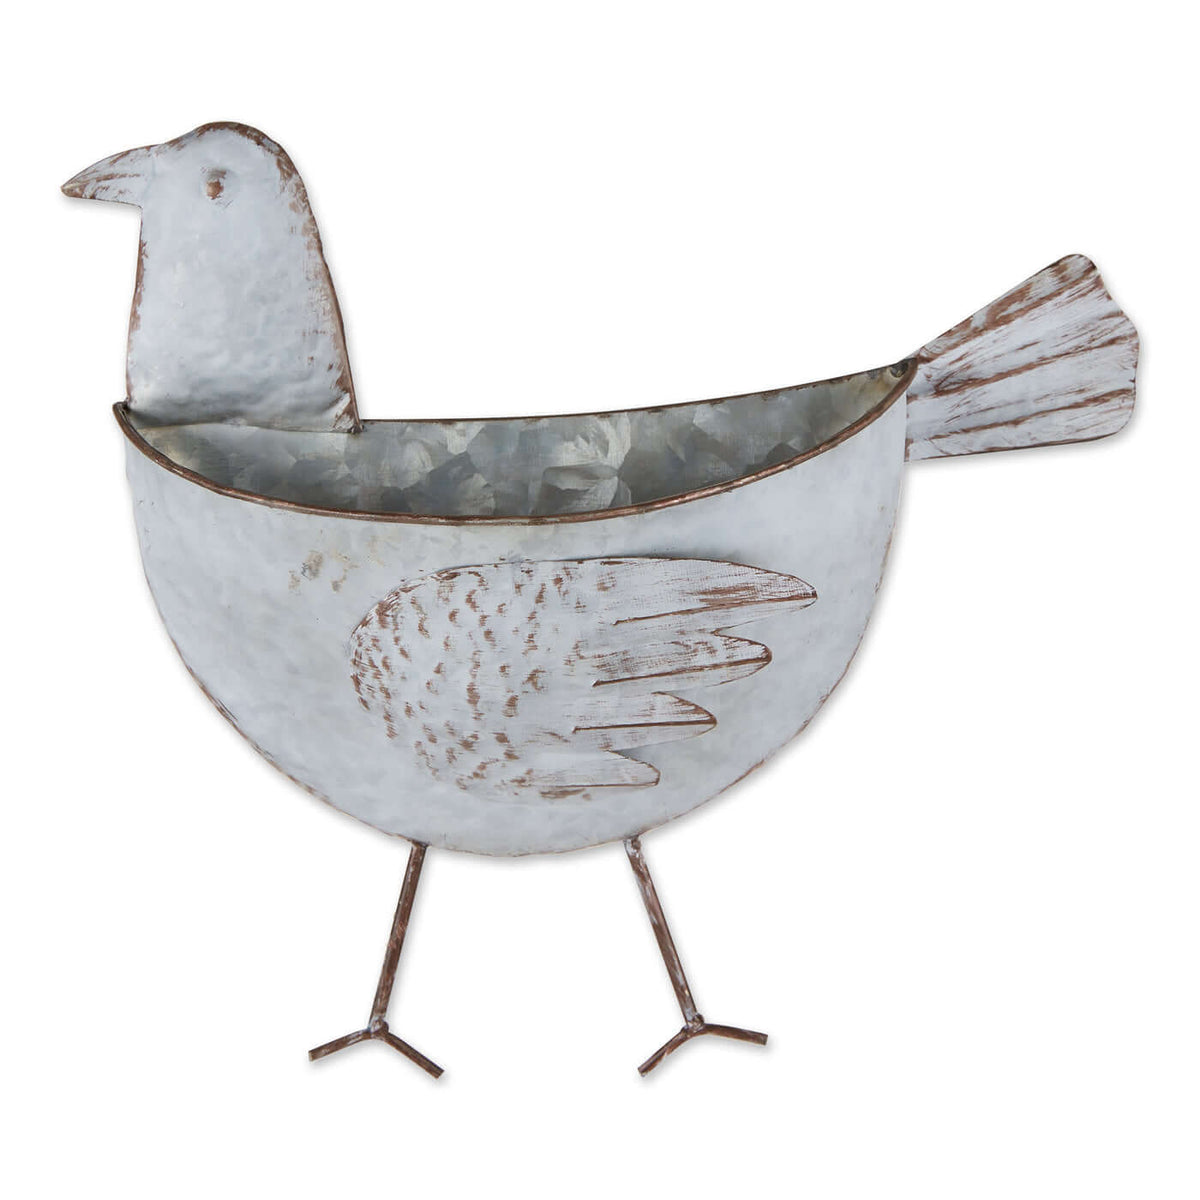 Bird and Rooster Galvanized Wall Planter